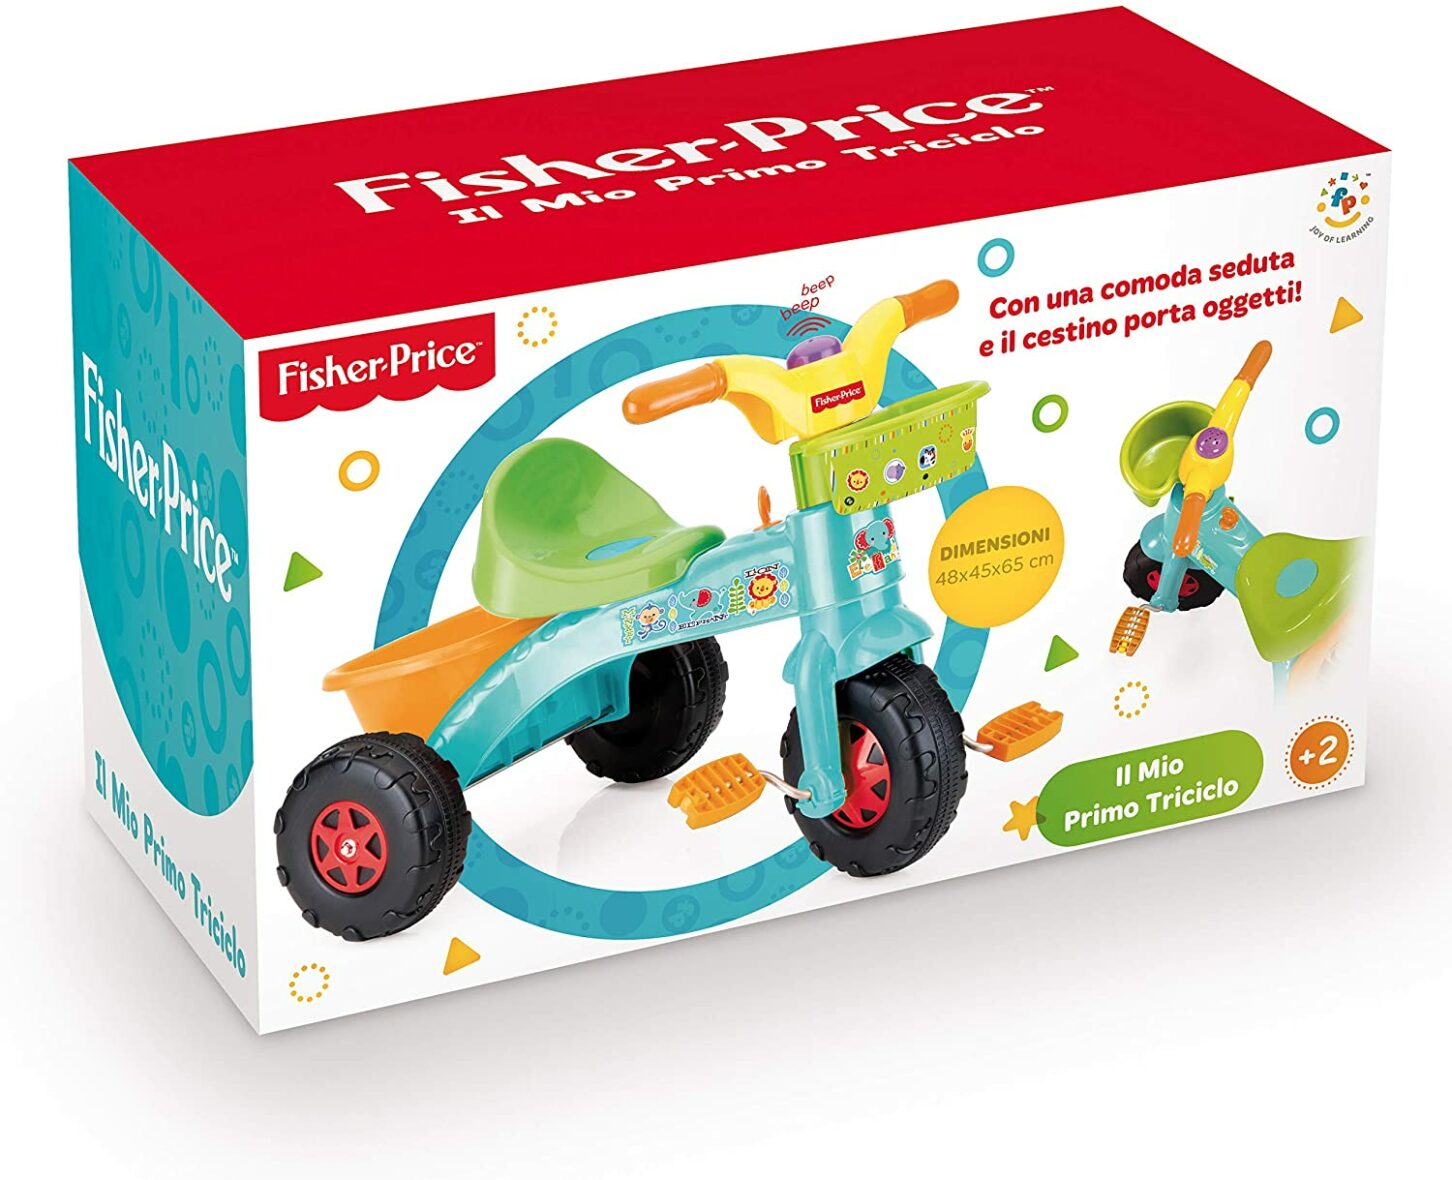 tricycle fisher price petit ange tunisie